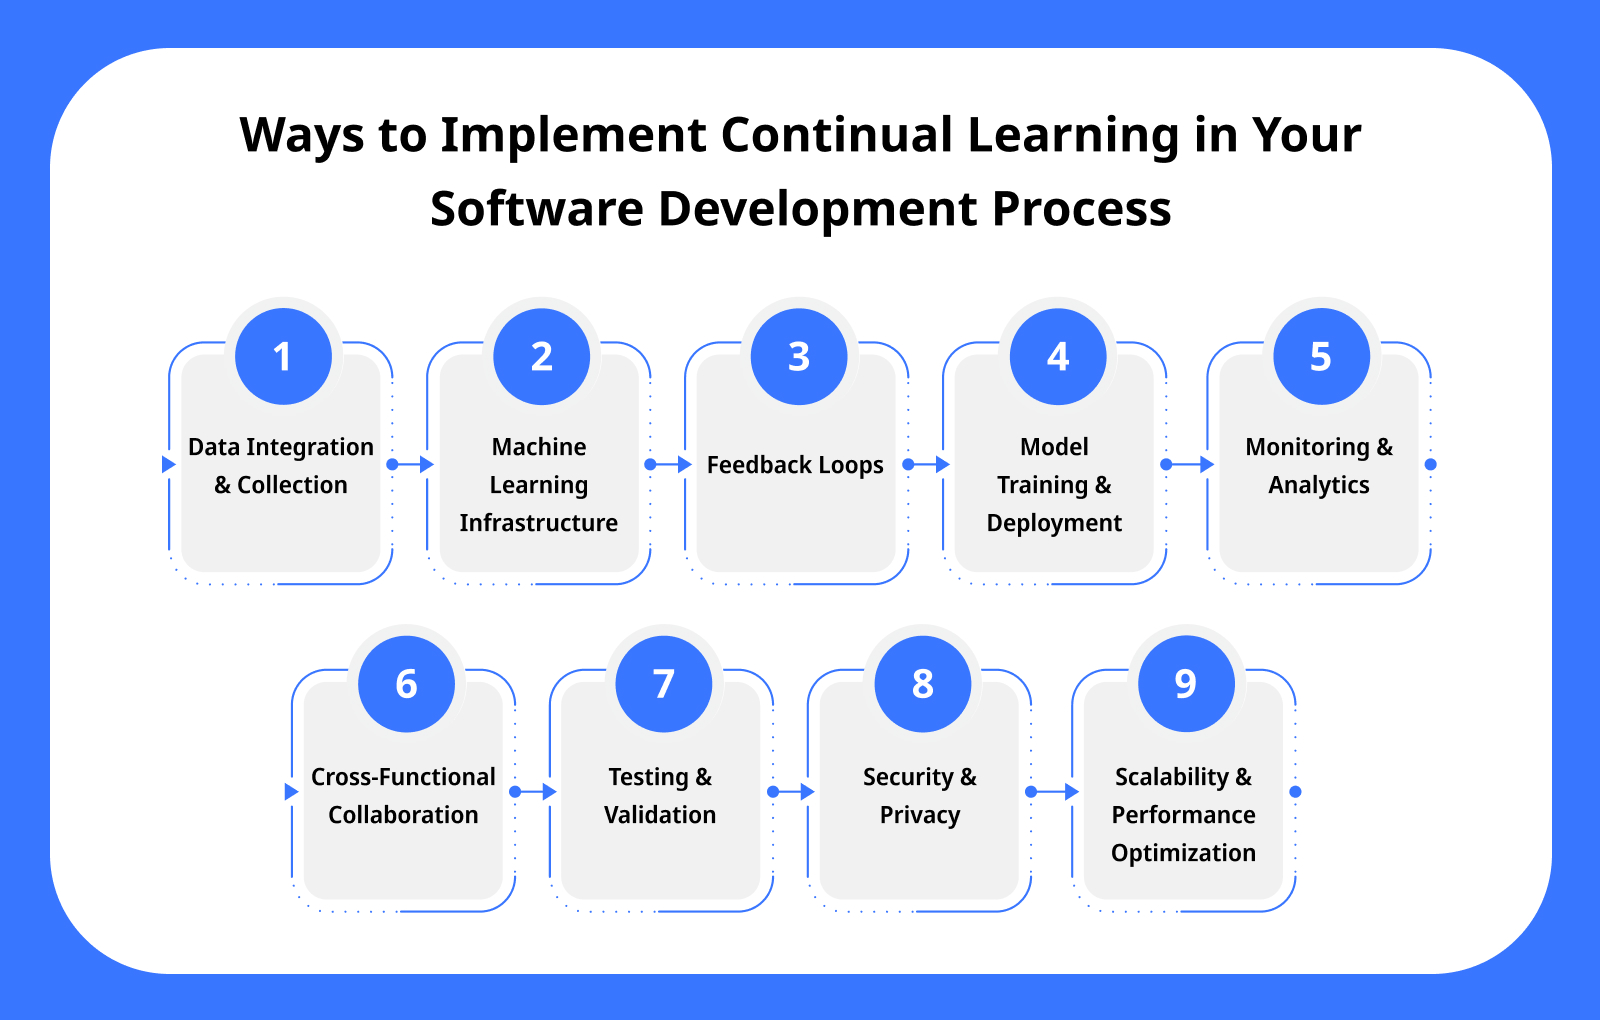 Ways to Implement Continual Learning in Your Software Development Process